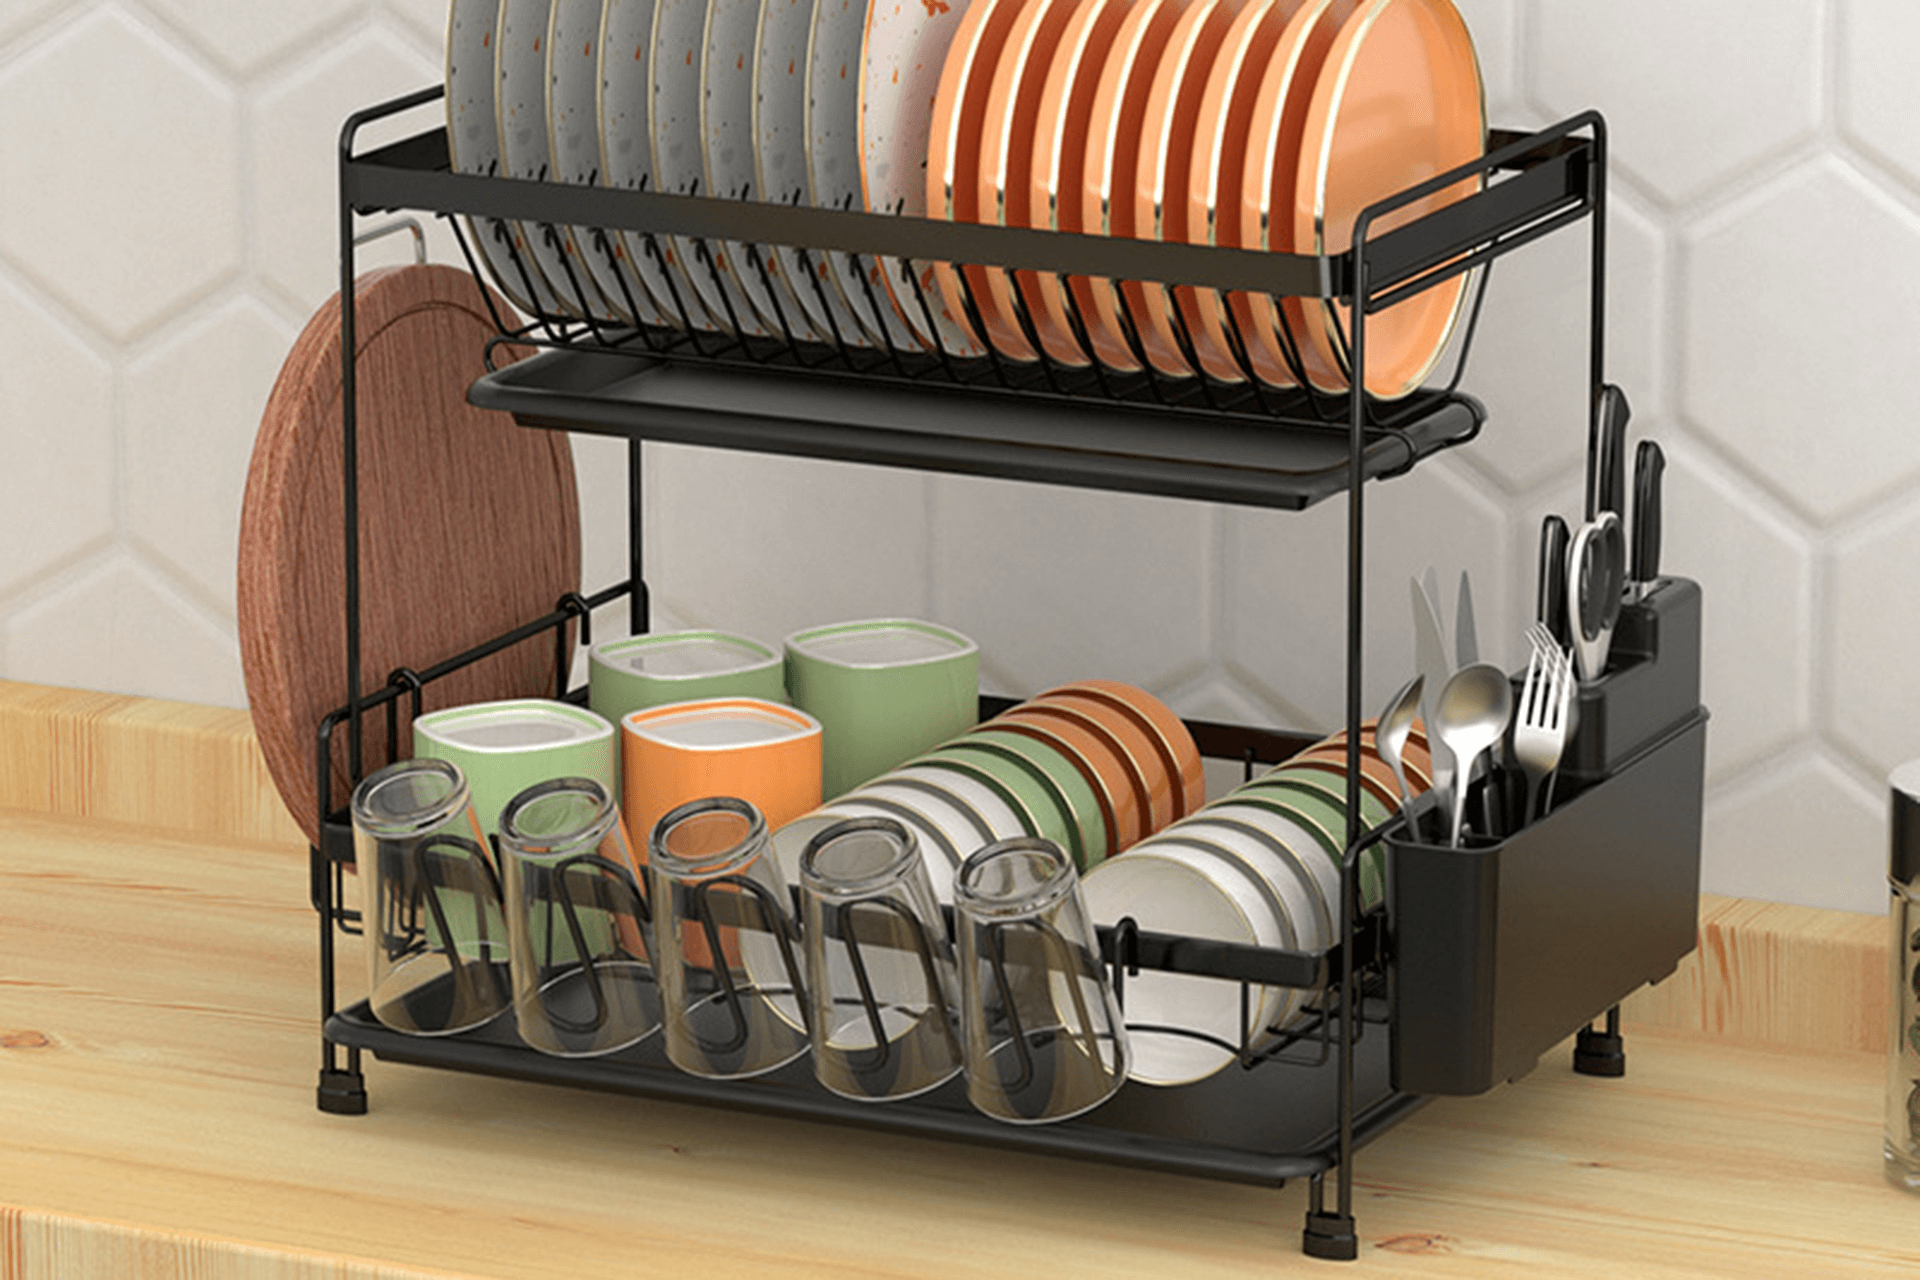 Orderly Arrangement of Dishes, Beautiful And Practical Dishes Storage Display Rack